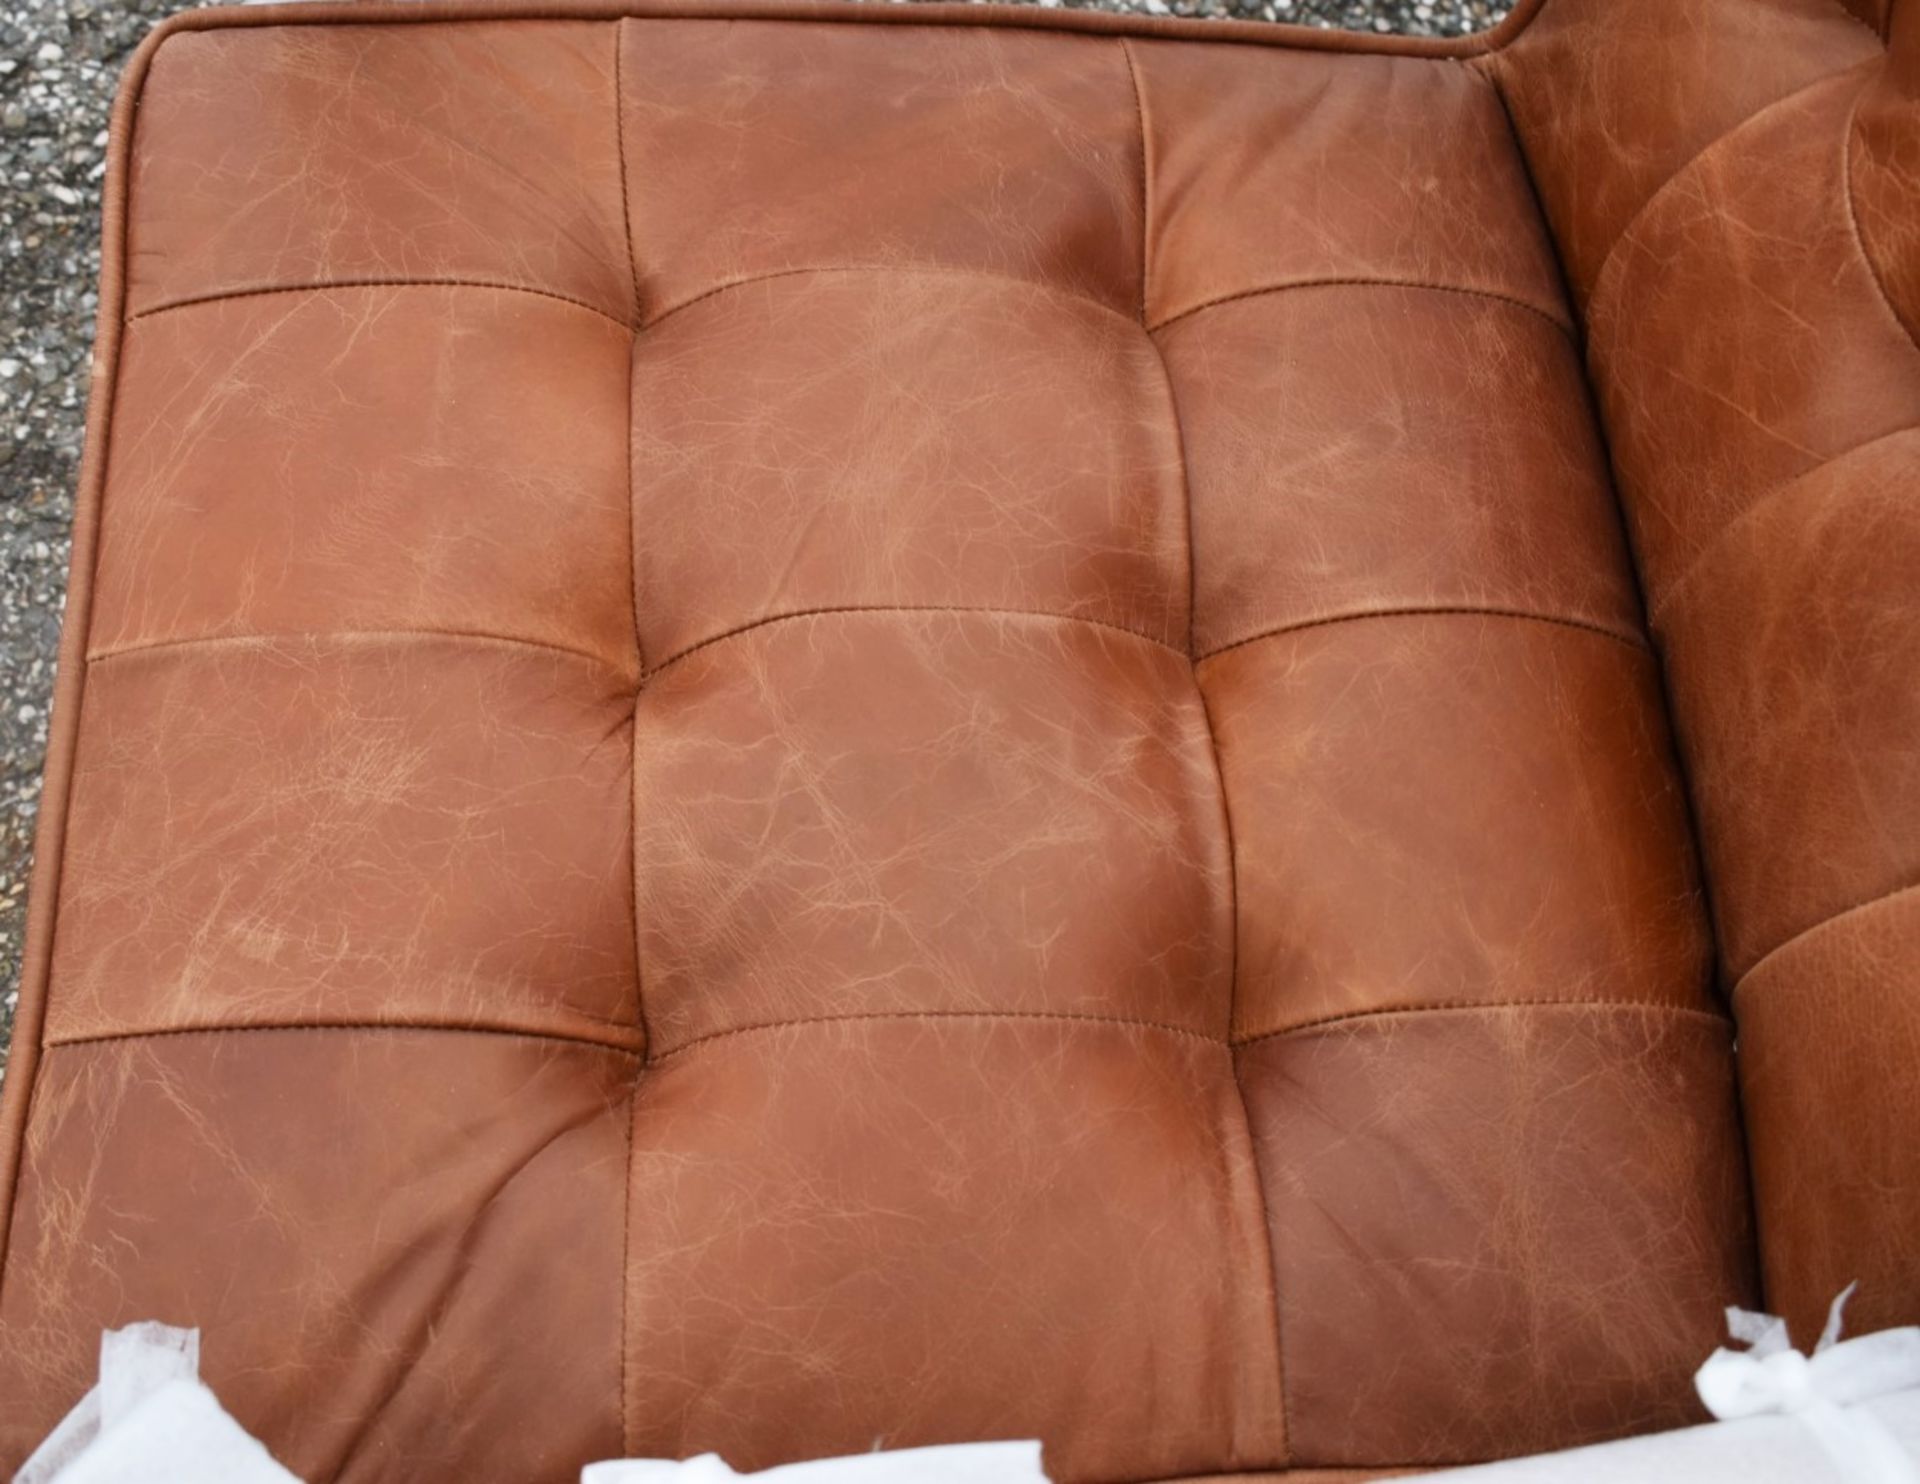 1 x 'Humber' Armchair Upholstered Vintage Brown Leather - New / Unused Stock - CL011 - Location: - Image 6 of 7